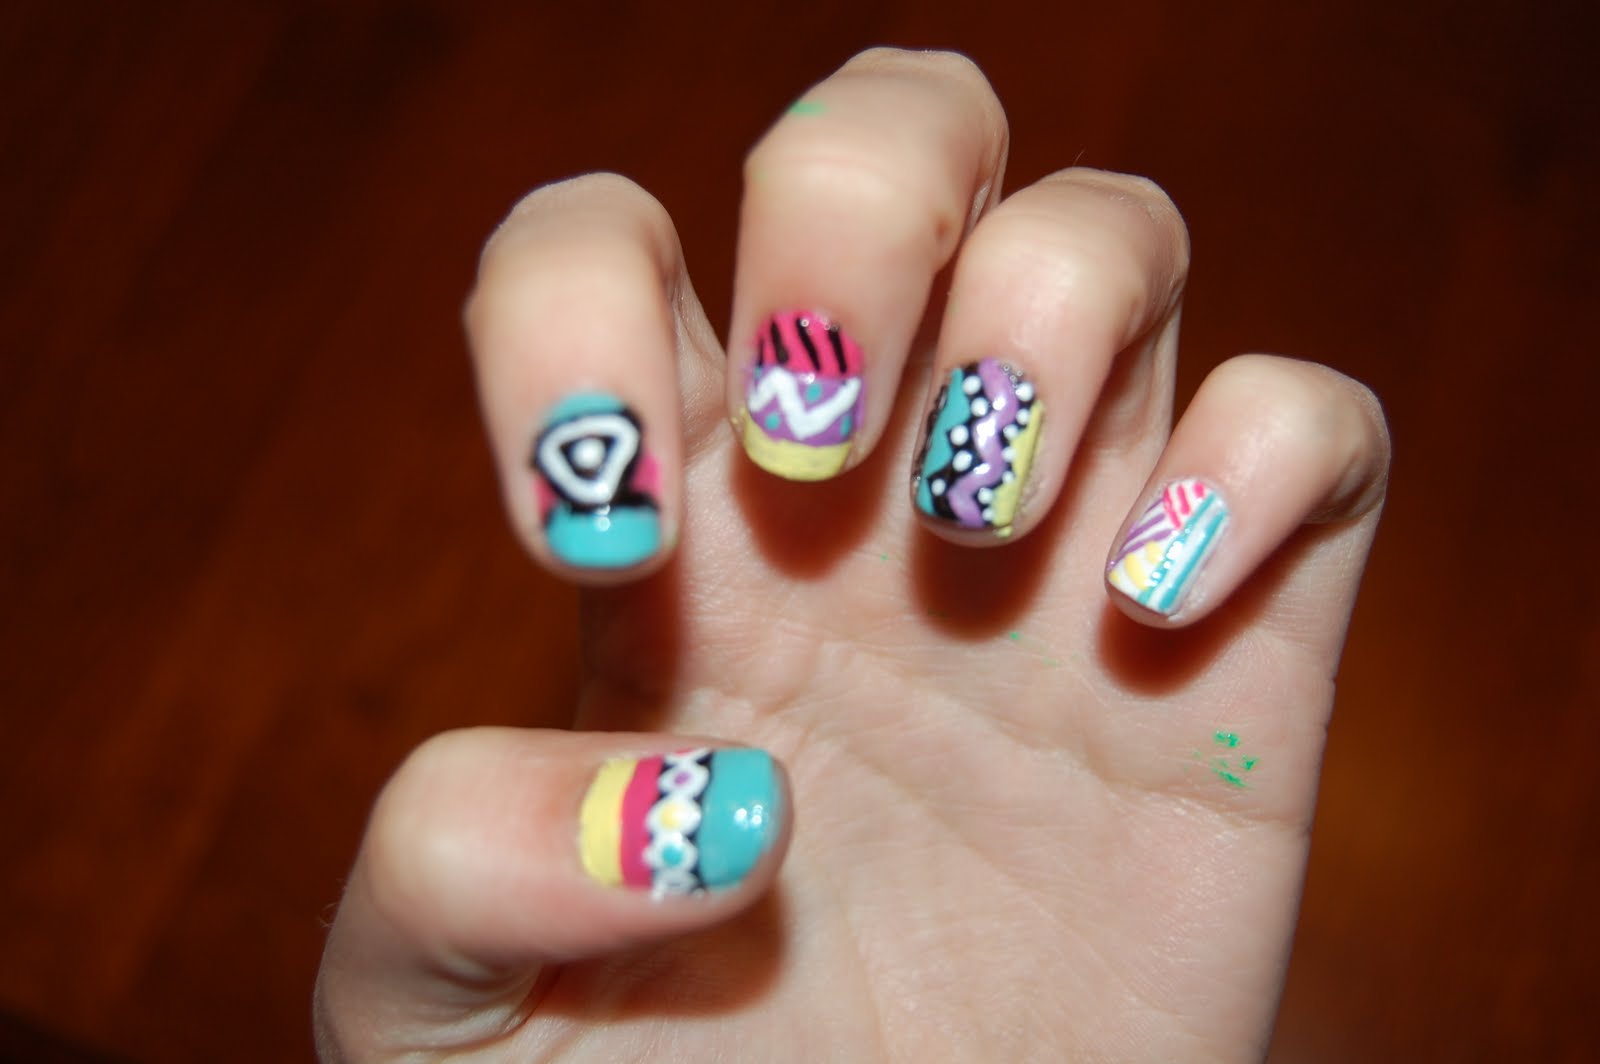 2. Tribal Nail Art Designs for Gel Nails - wide 7